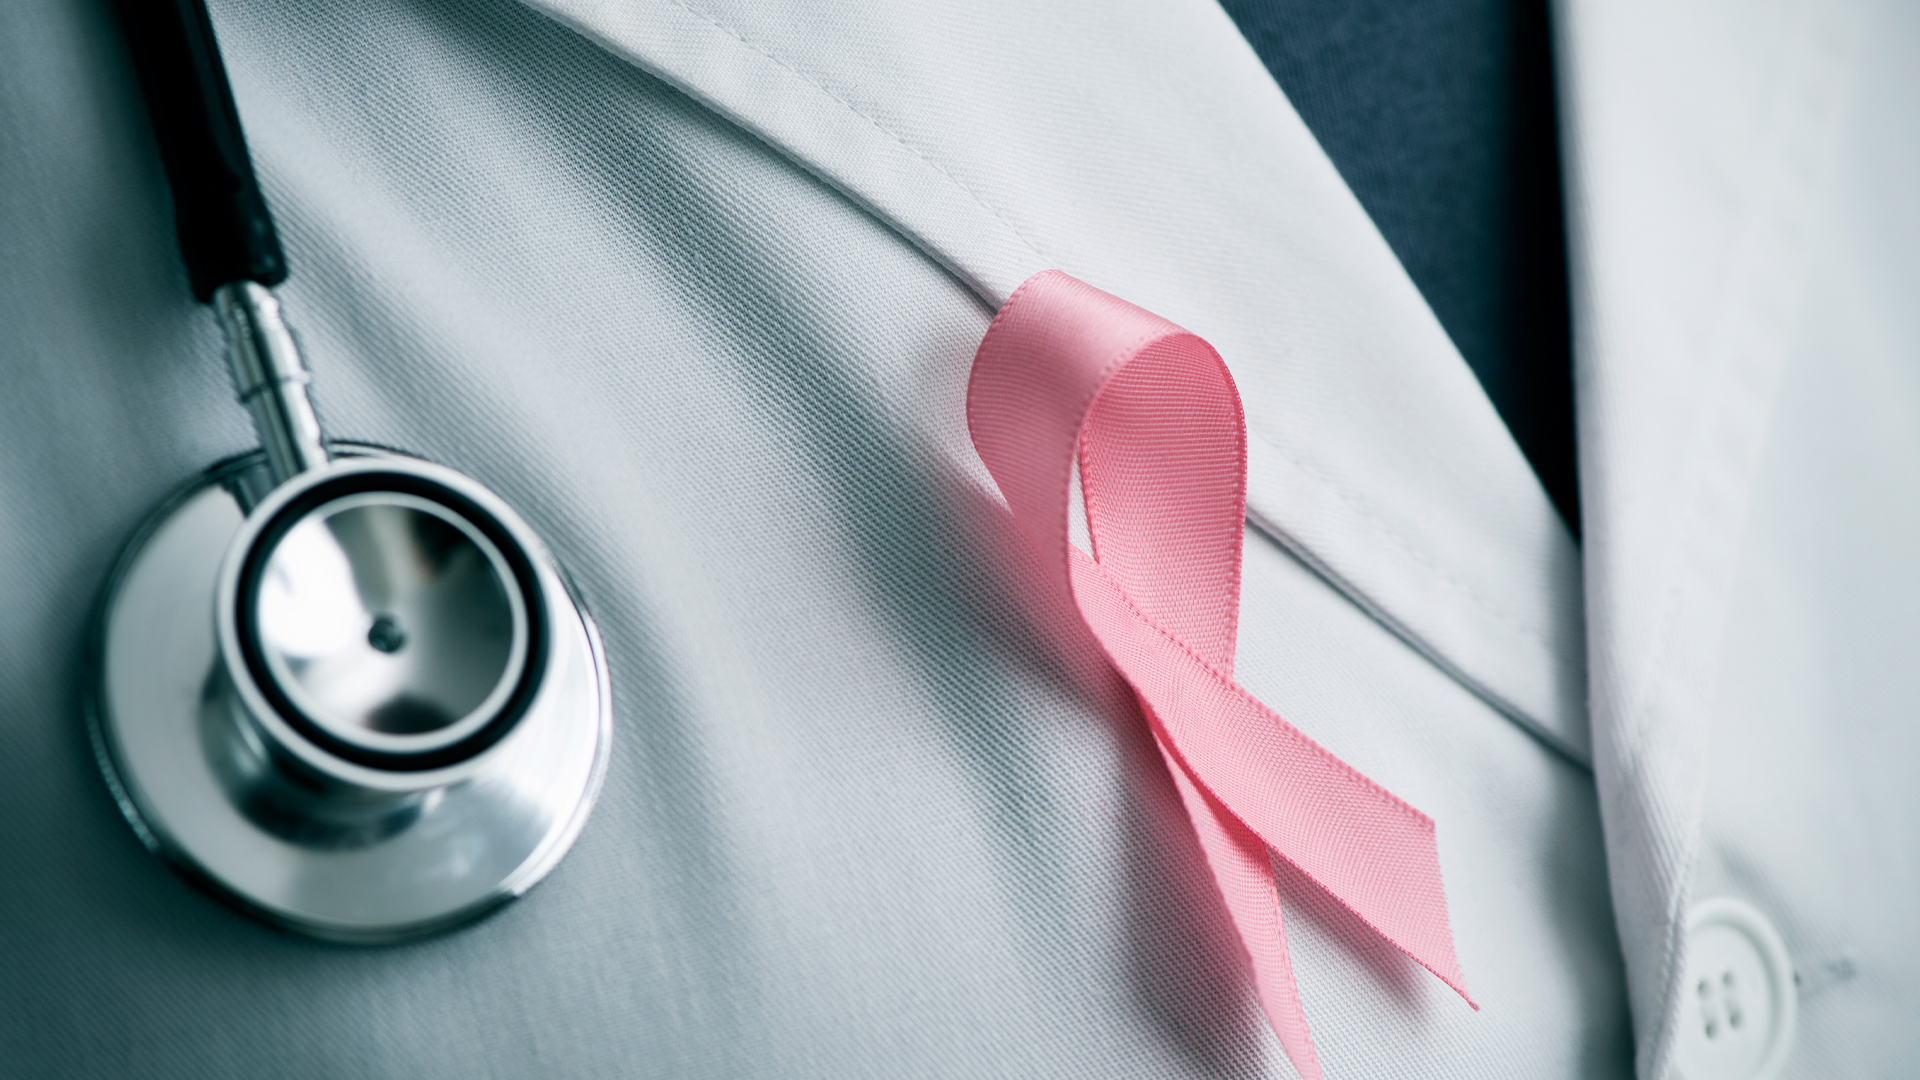 With the new Parliament, breast cancer care and prevention must be a top priority